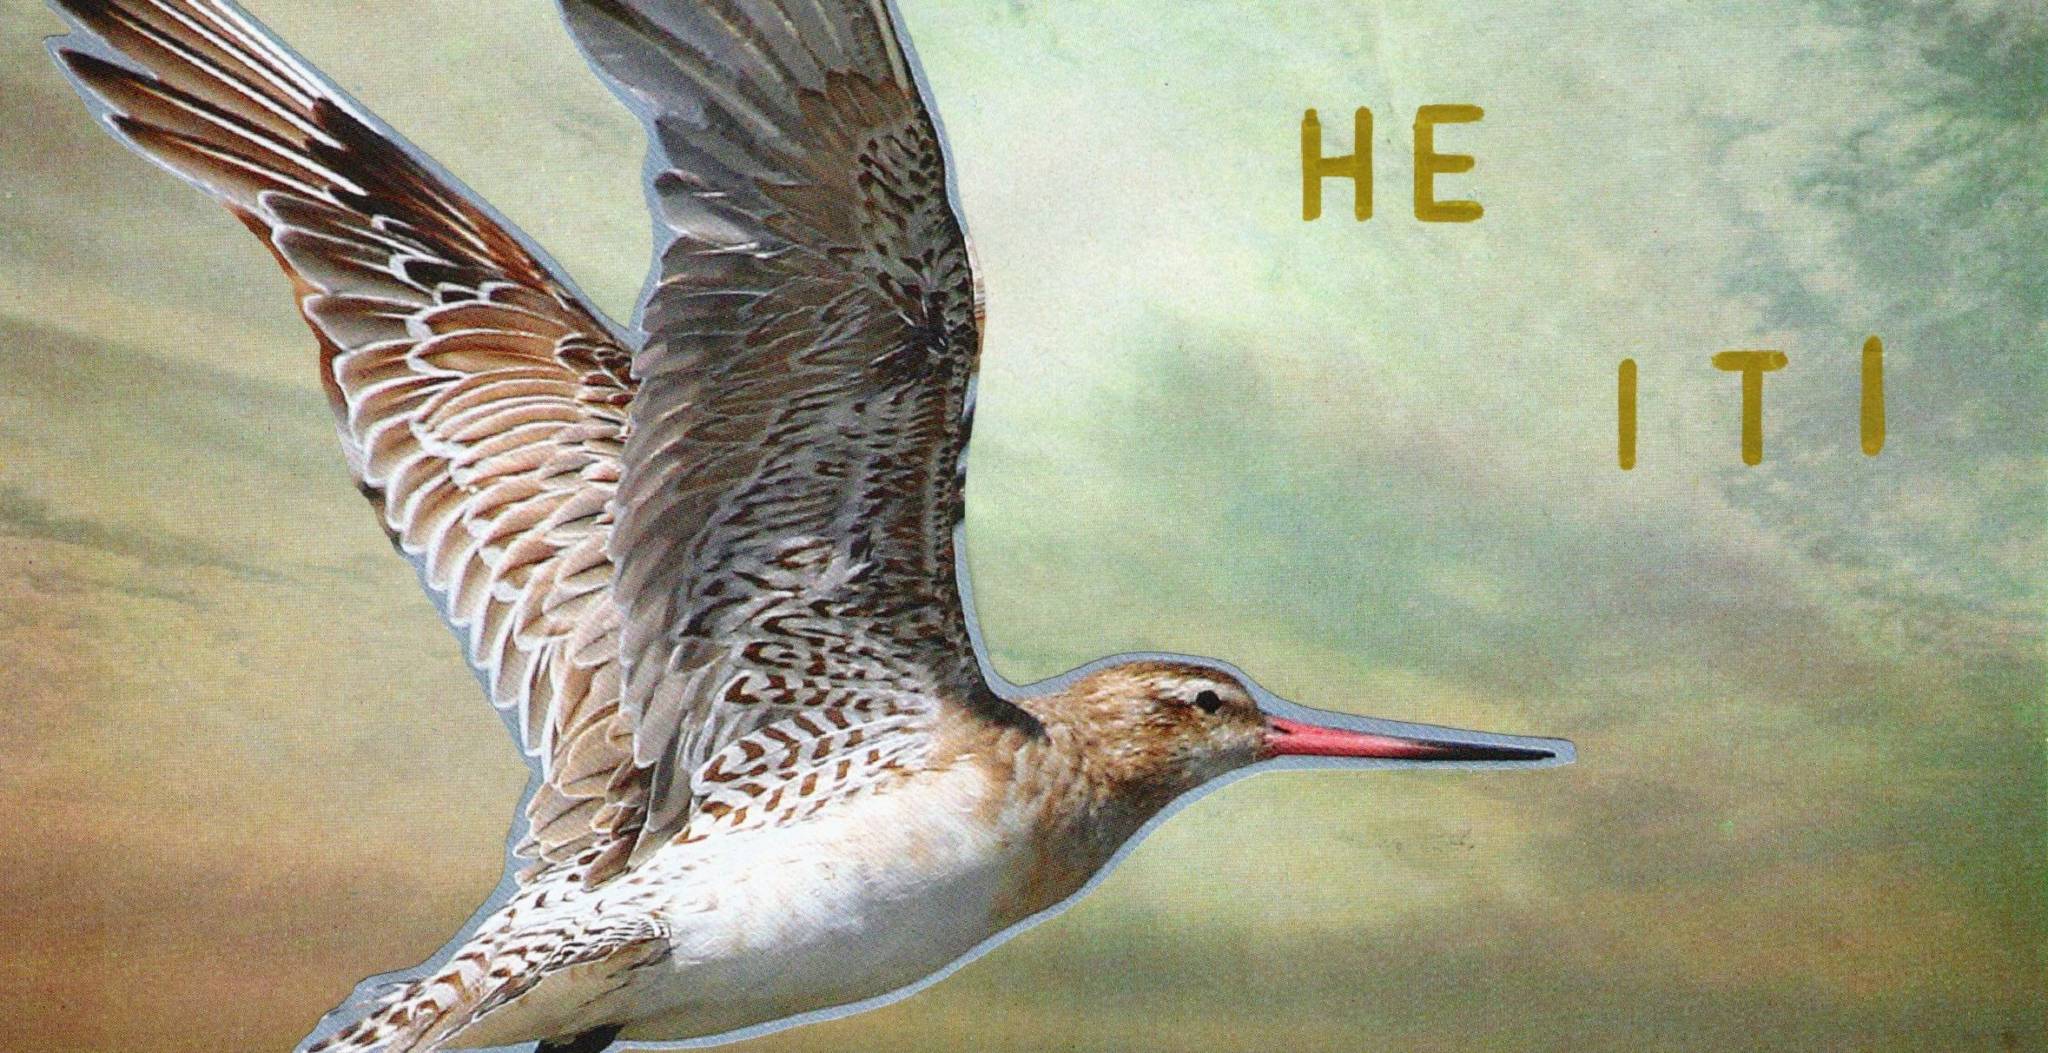 Image of a bird flying on a golden background with the text 'He Iti'